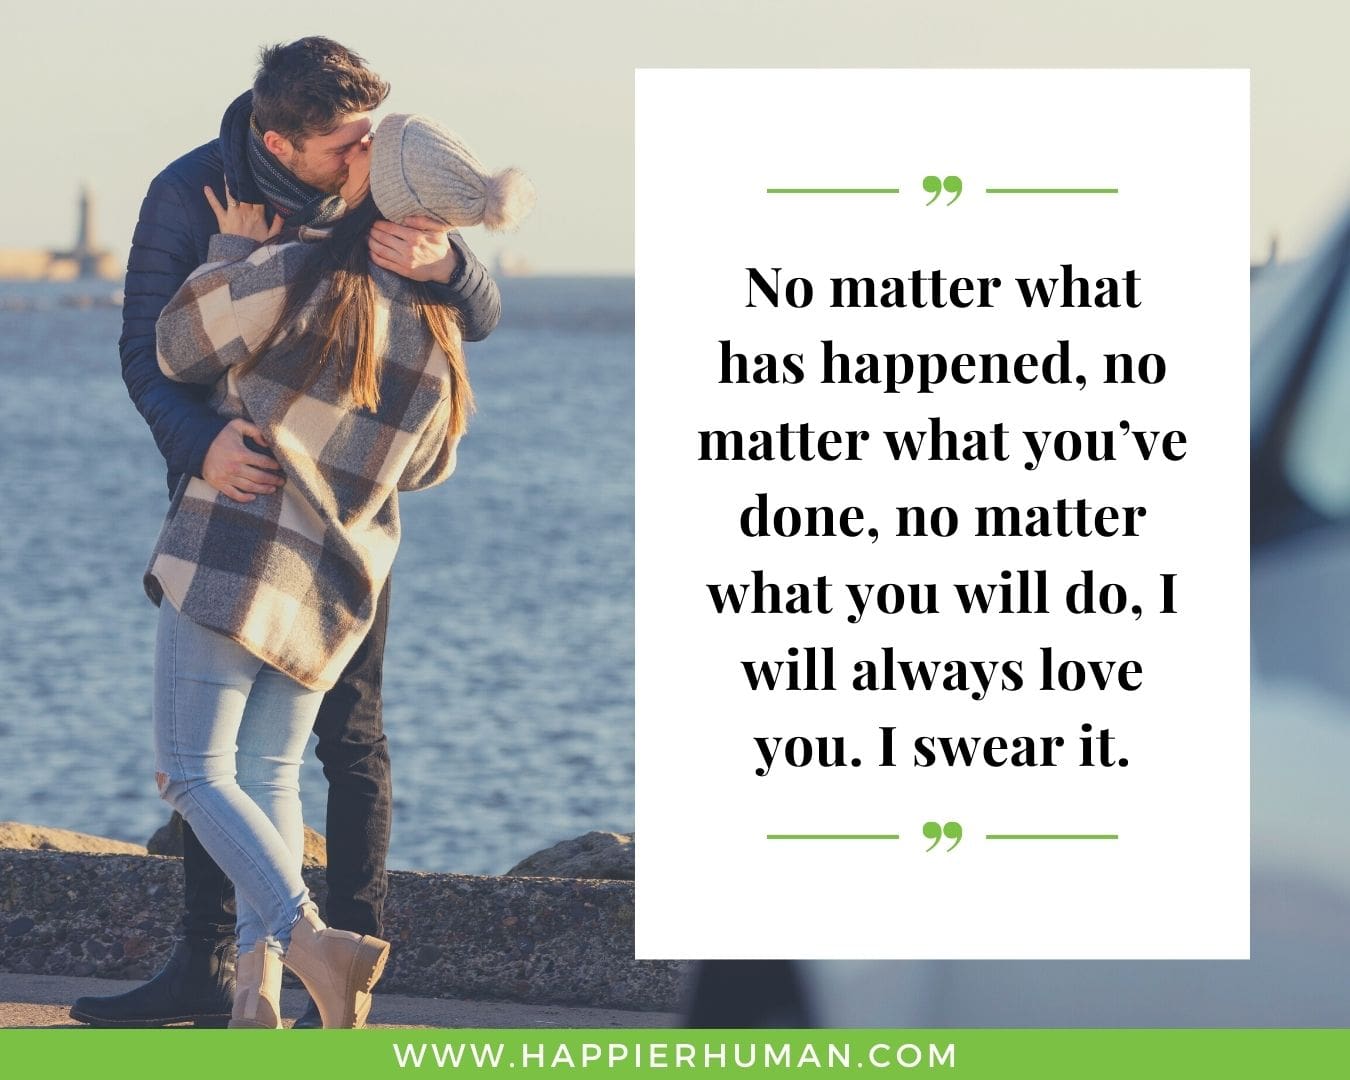 Unconditional Love Quotes for Her - “No matter what has happened, no matter what you’ve done, no matter what you will do, I will always love you. I swear it.”